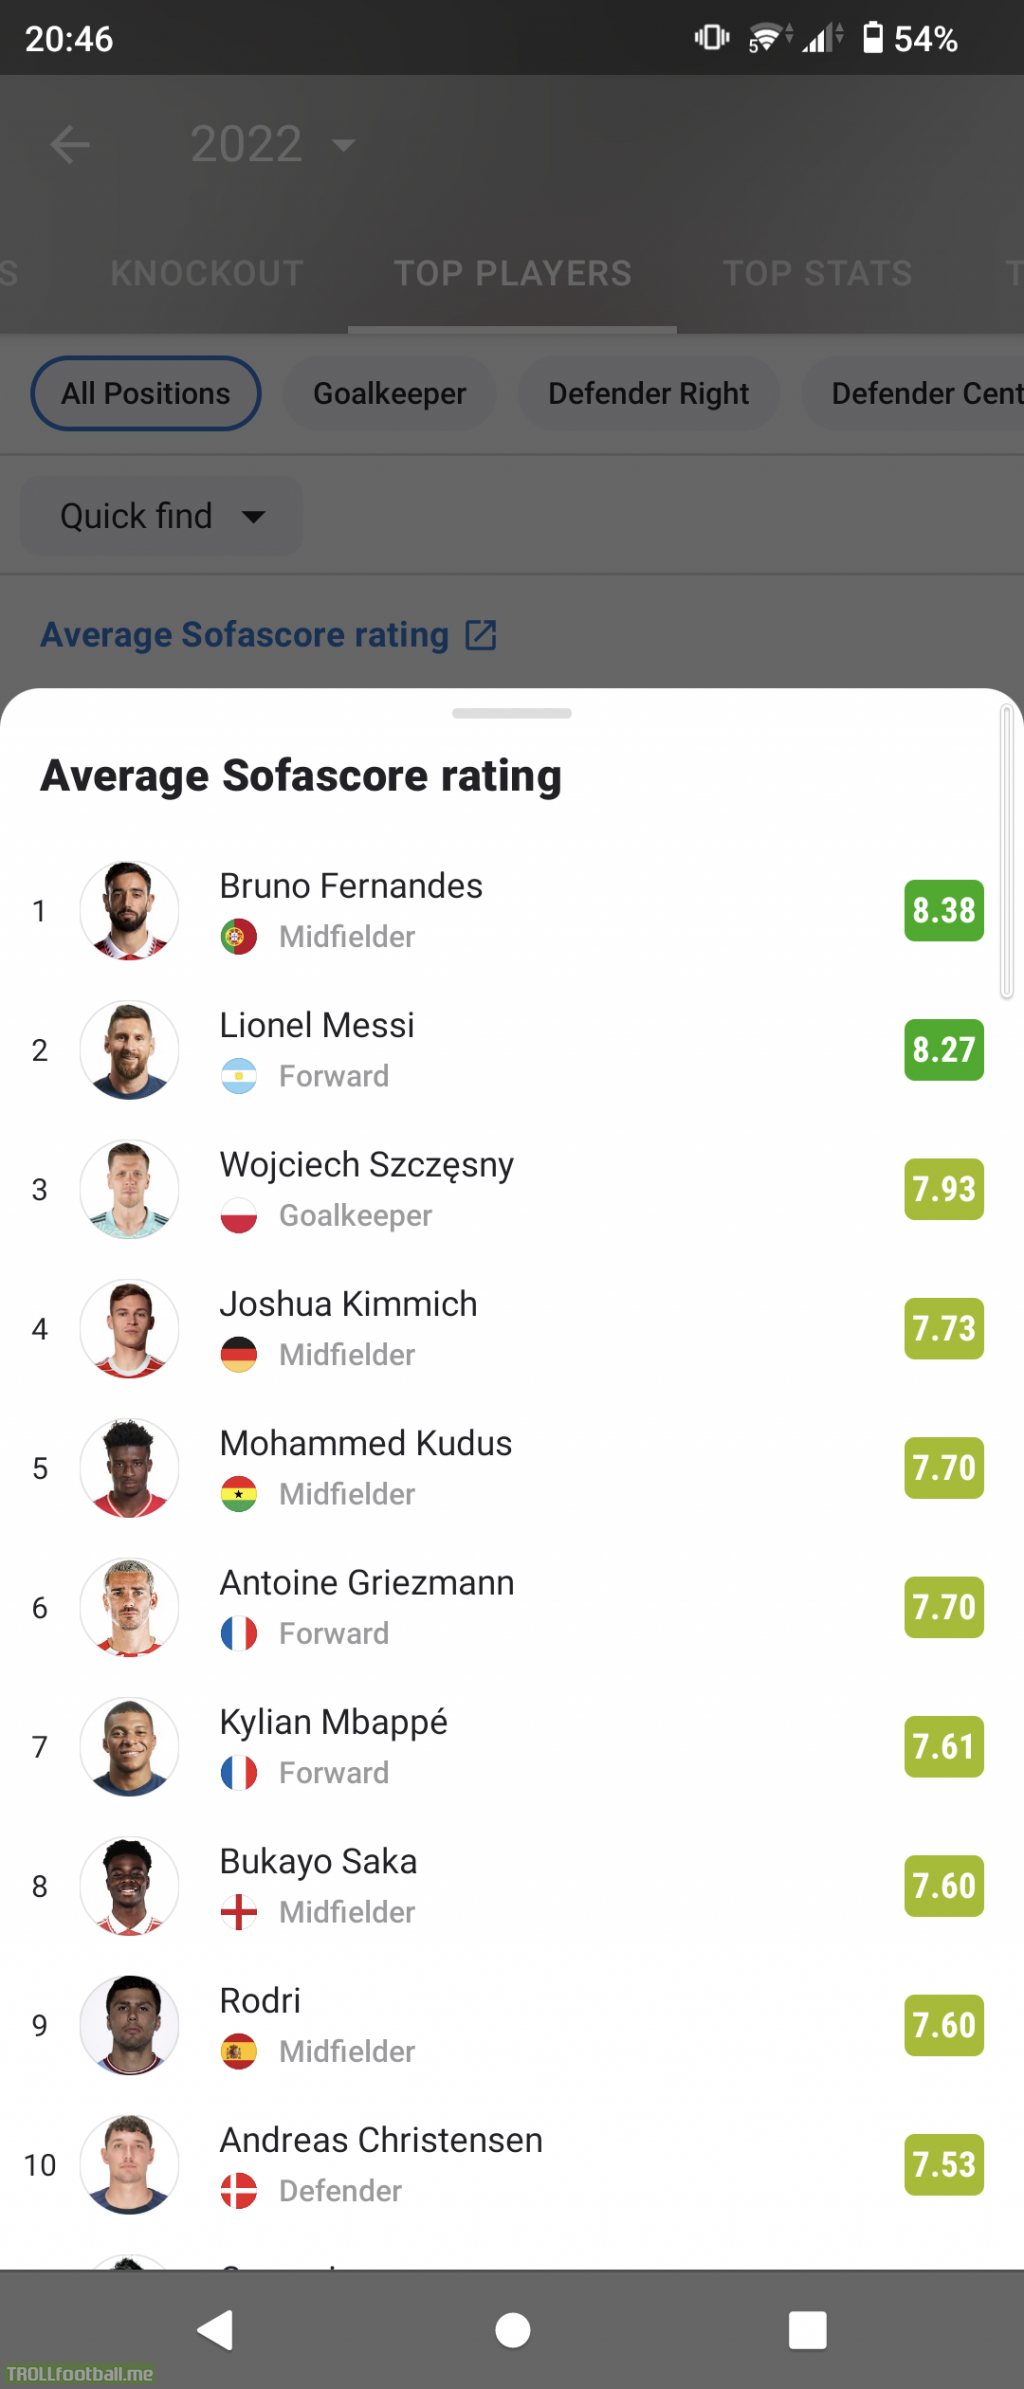 SofaScore Top 10 players at the 2022 World Cup